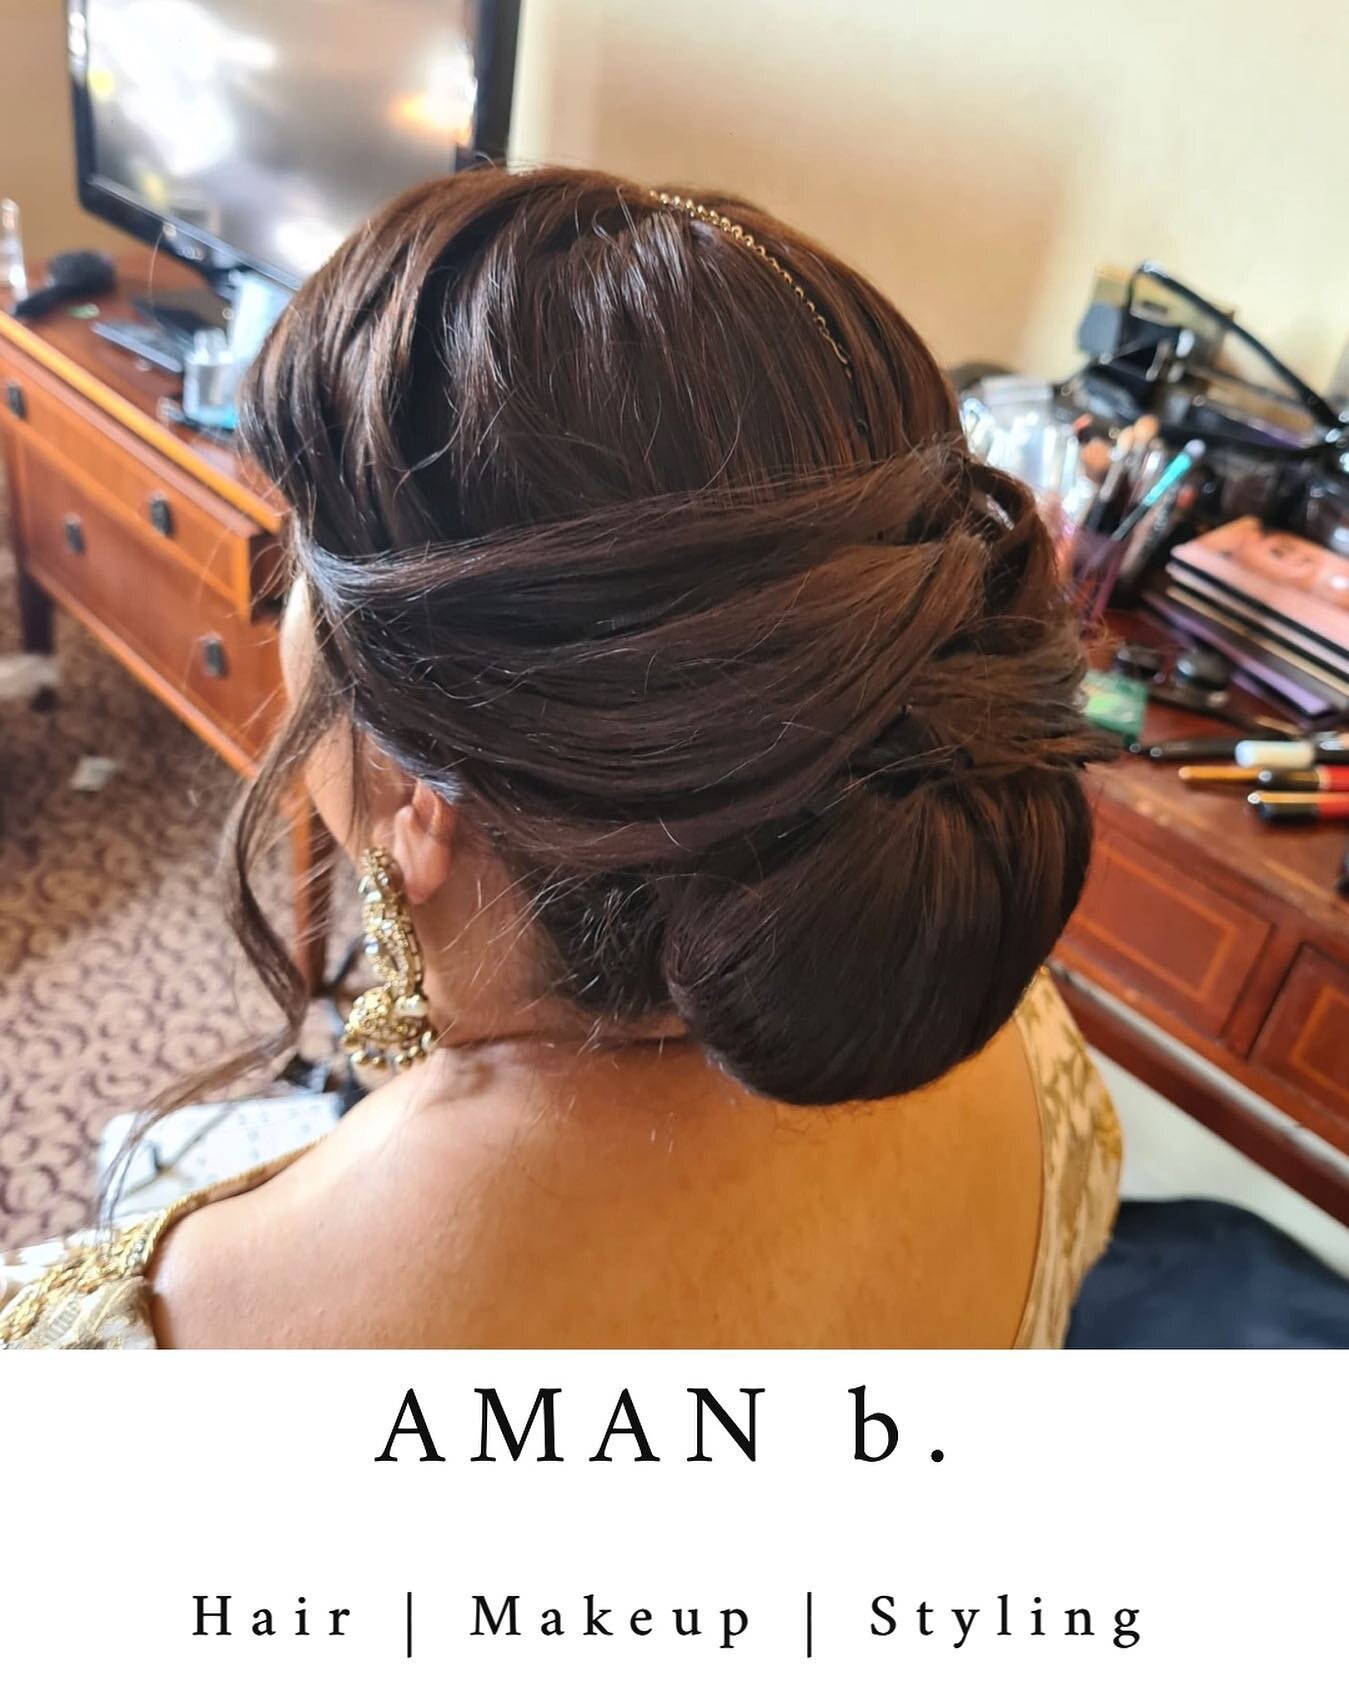 💄Stylist: AMAN b.
📍Location: LEICESTER - available to travel ----------------------------------------------------------------------------------
To BOOK 👉🏽 Email us at promakeuplondonstylists@gmail.com ---------------------------------------------